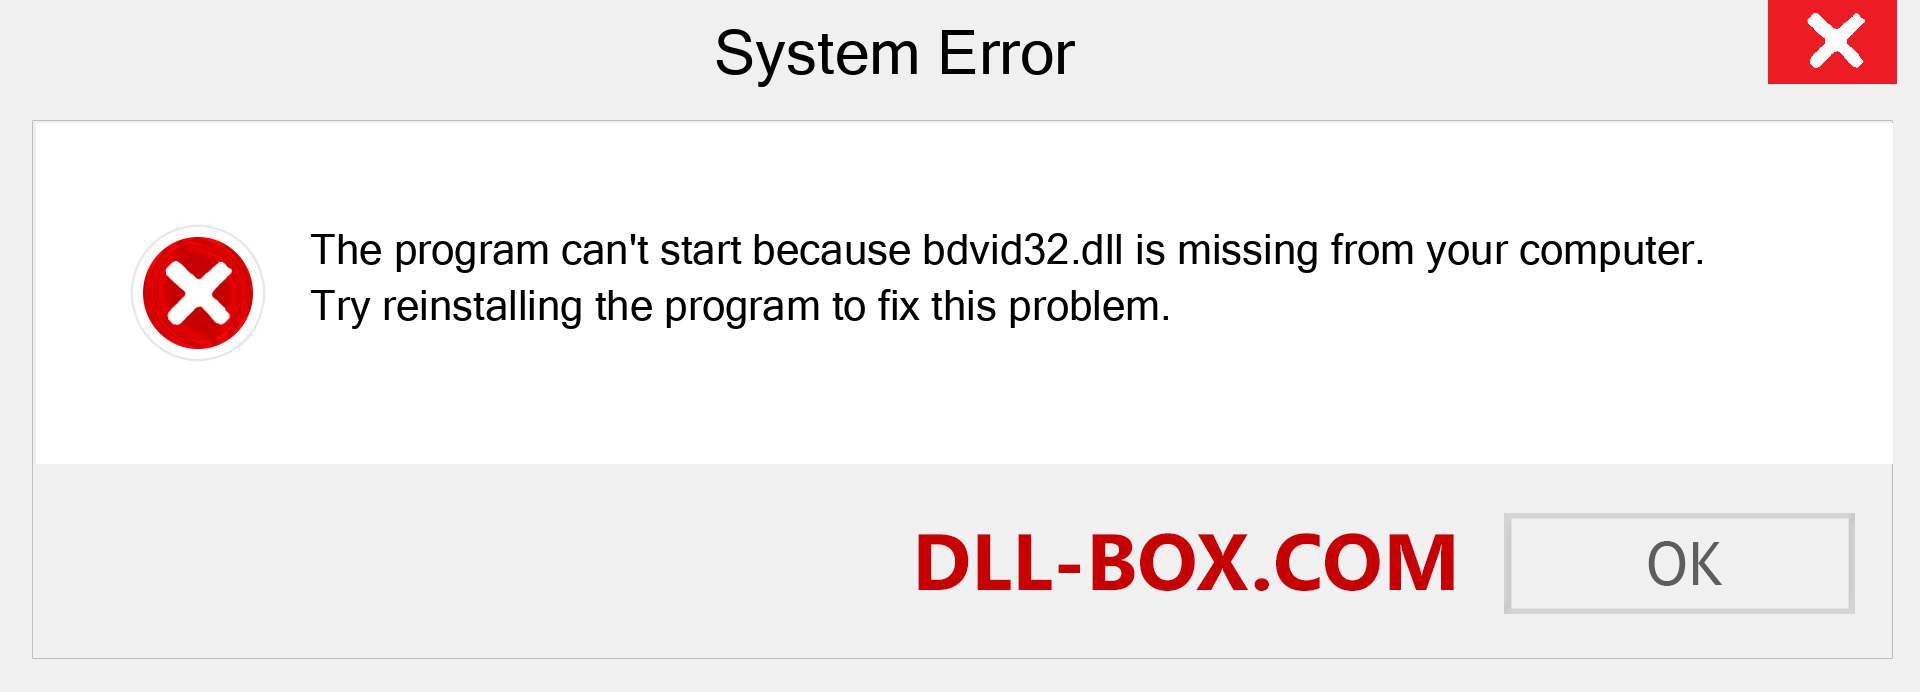  bdvid32.dll file is missing?. Download for Windows 7, 8, 10 - Fix  bdvid32 dll Missing Error on Windows, photos, images